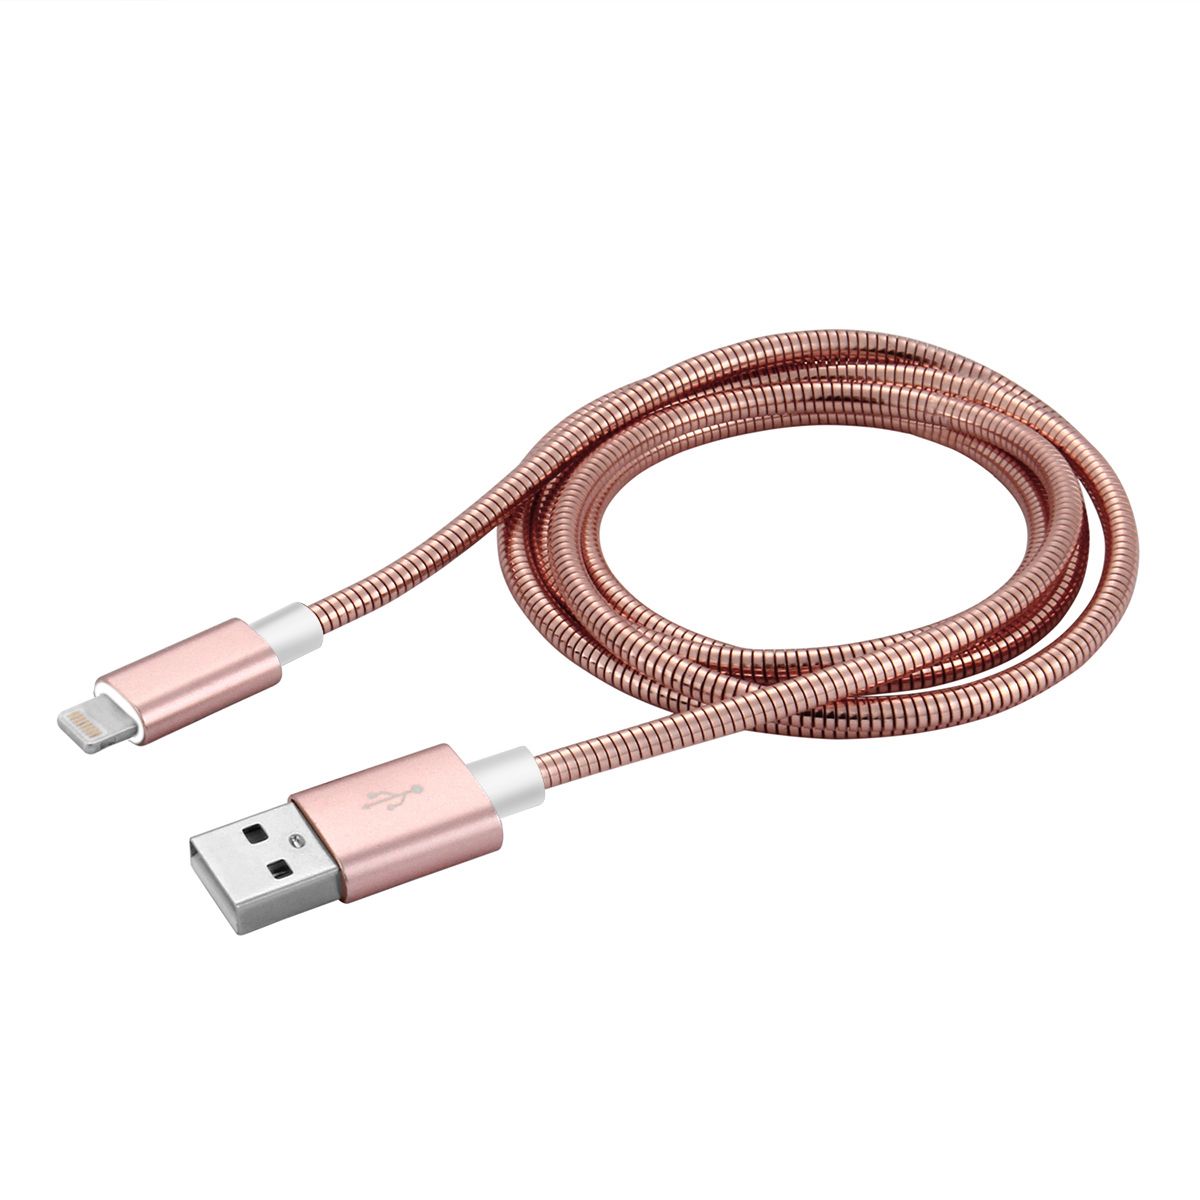 Metal Stainless Steel Spring Woven 8 pin Charging Data Cable for iOS Devices - Rose Gold